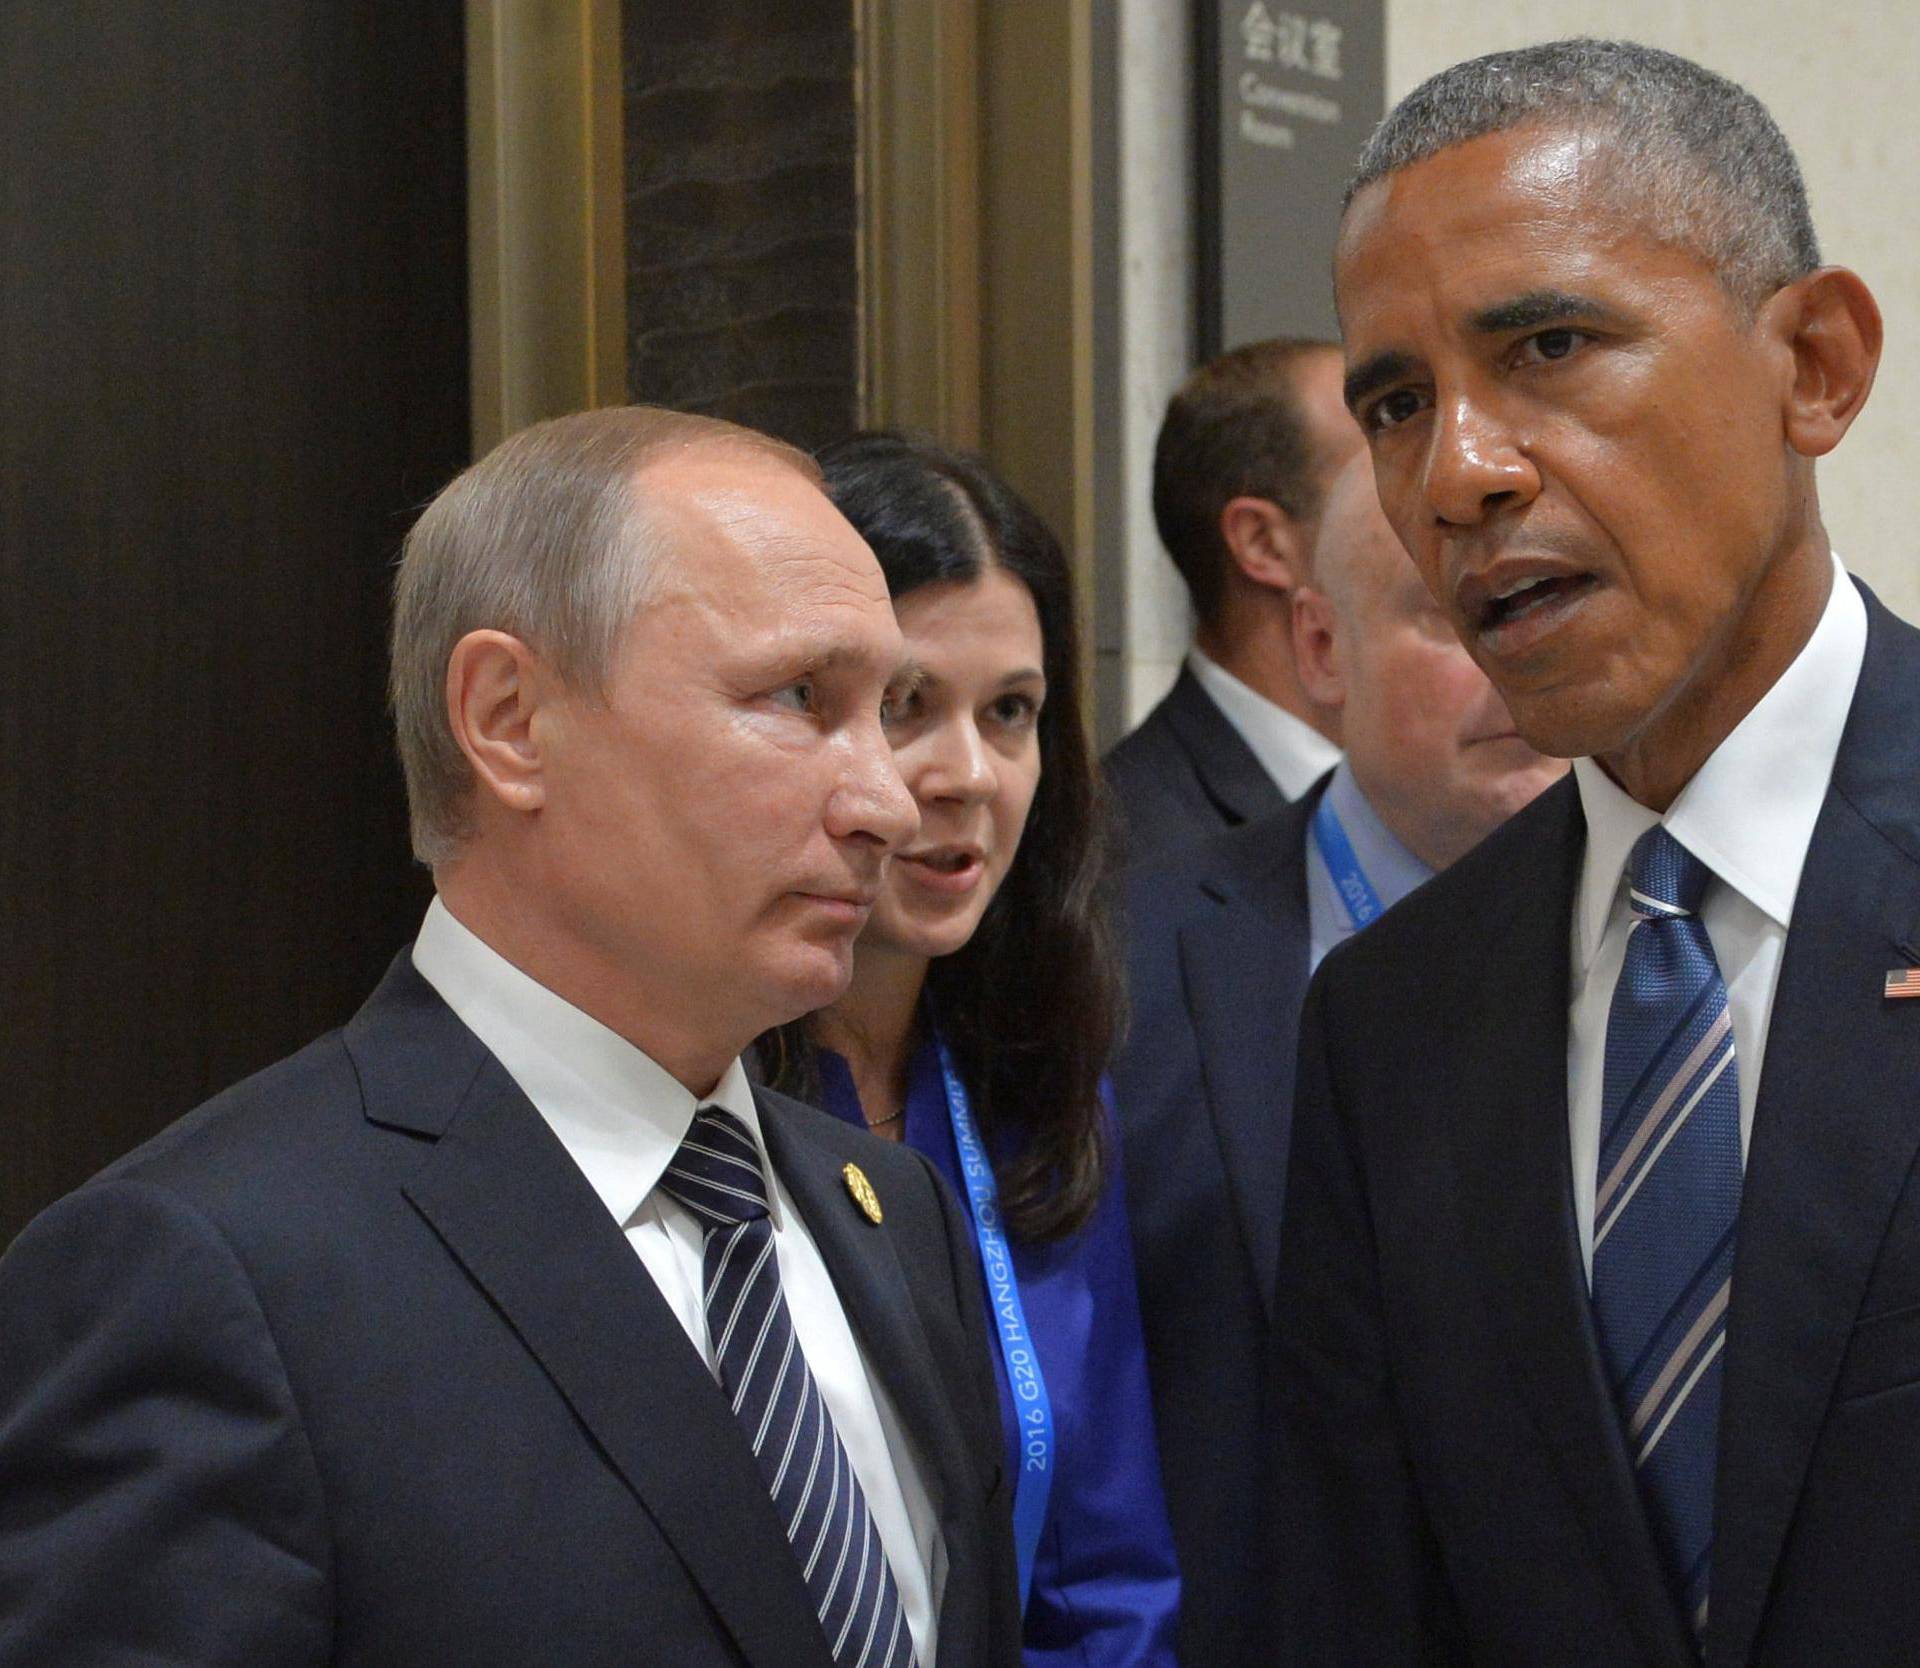 Russian President Putin meets with U.S. President Obama on sidelines of G20 Summit in Hangzhou